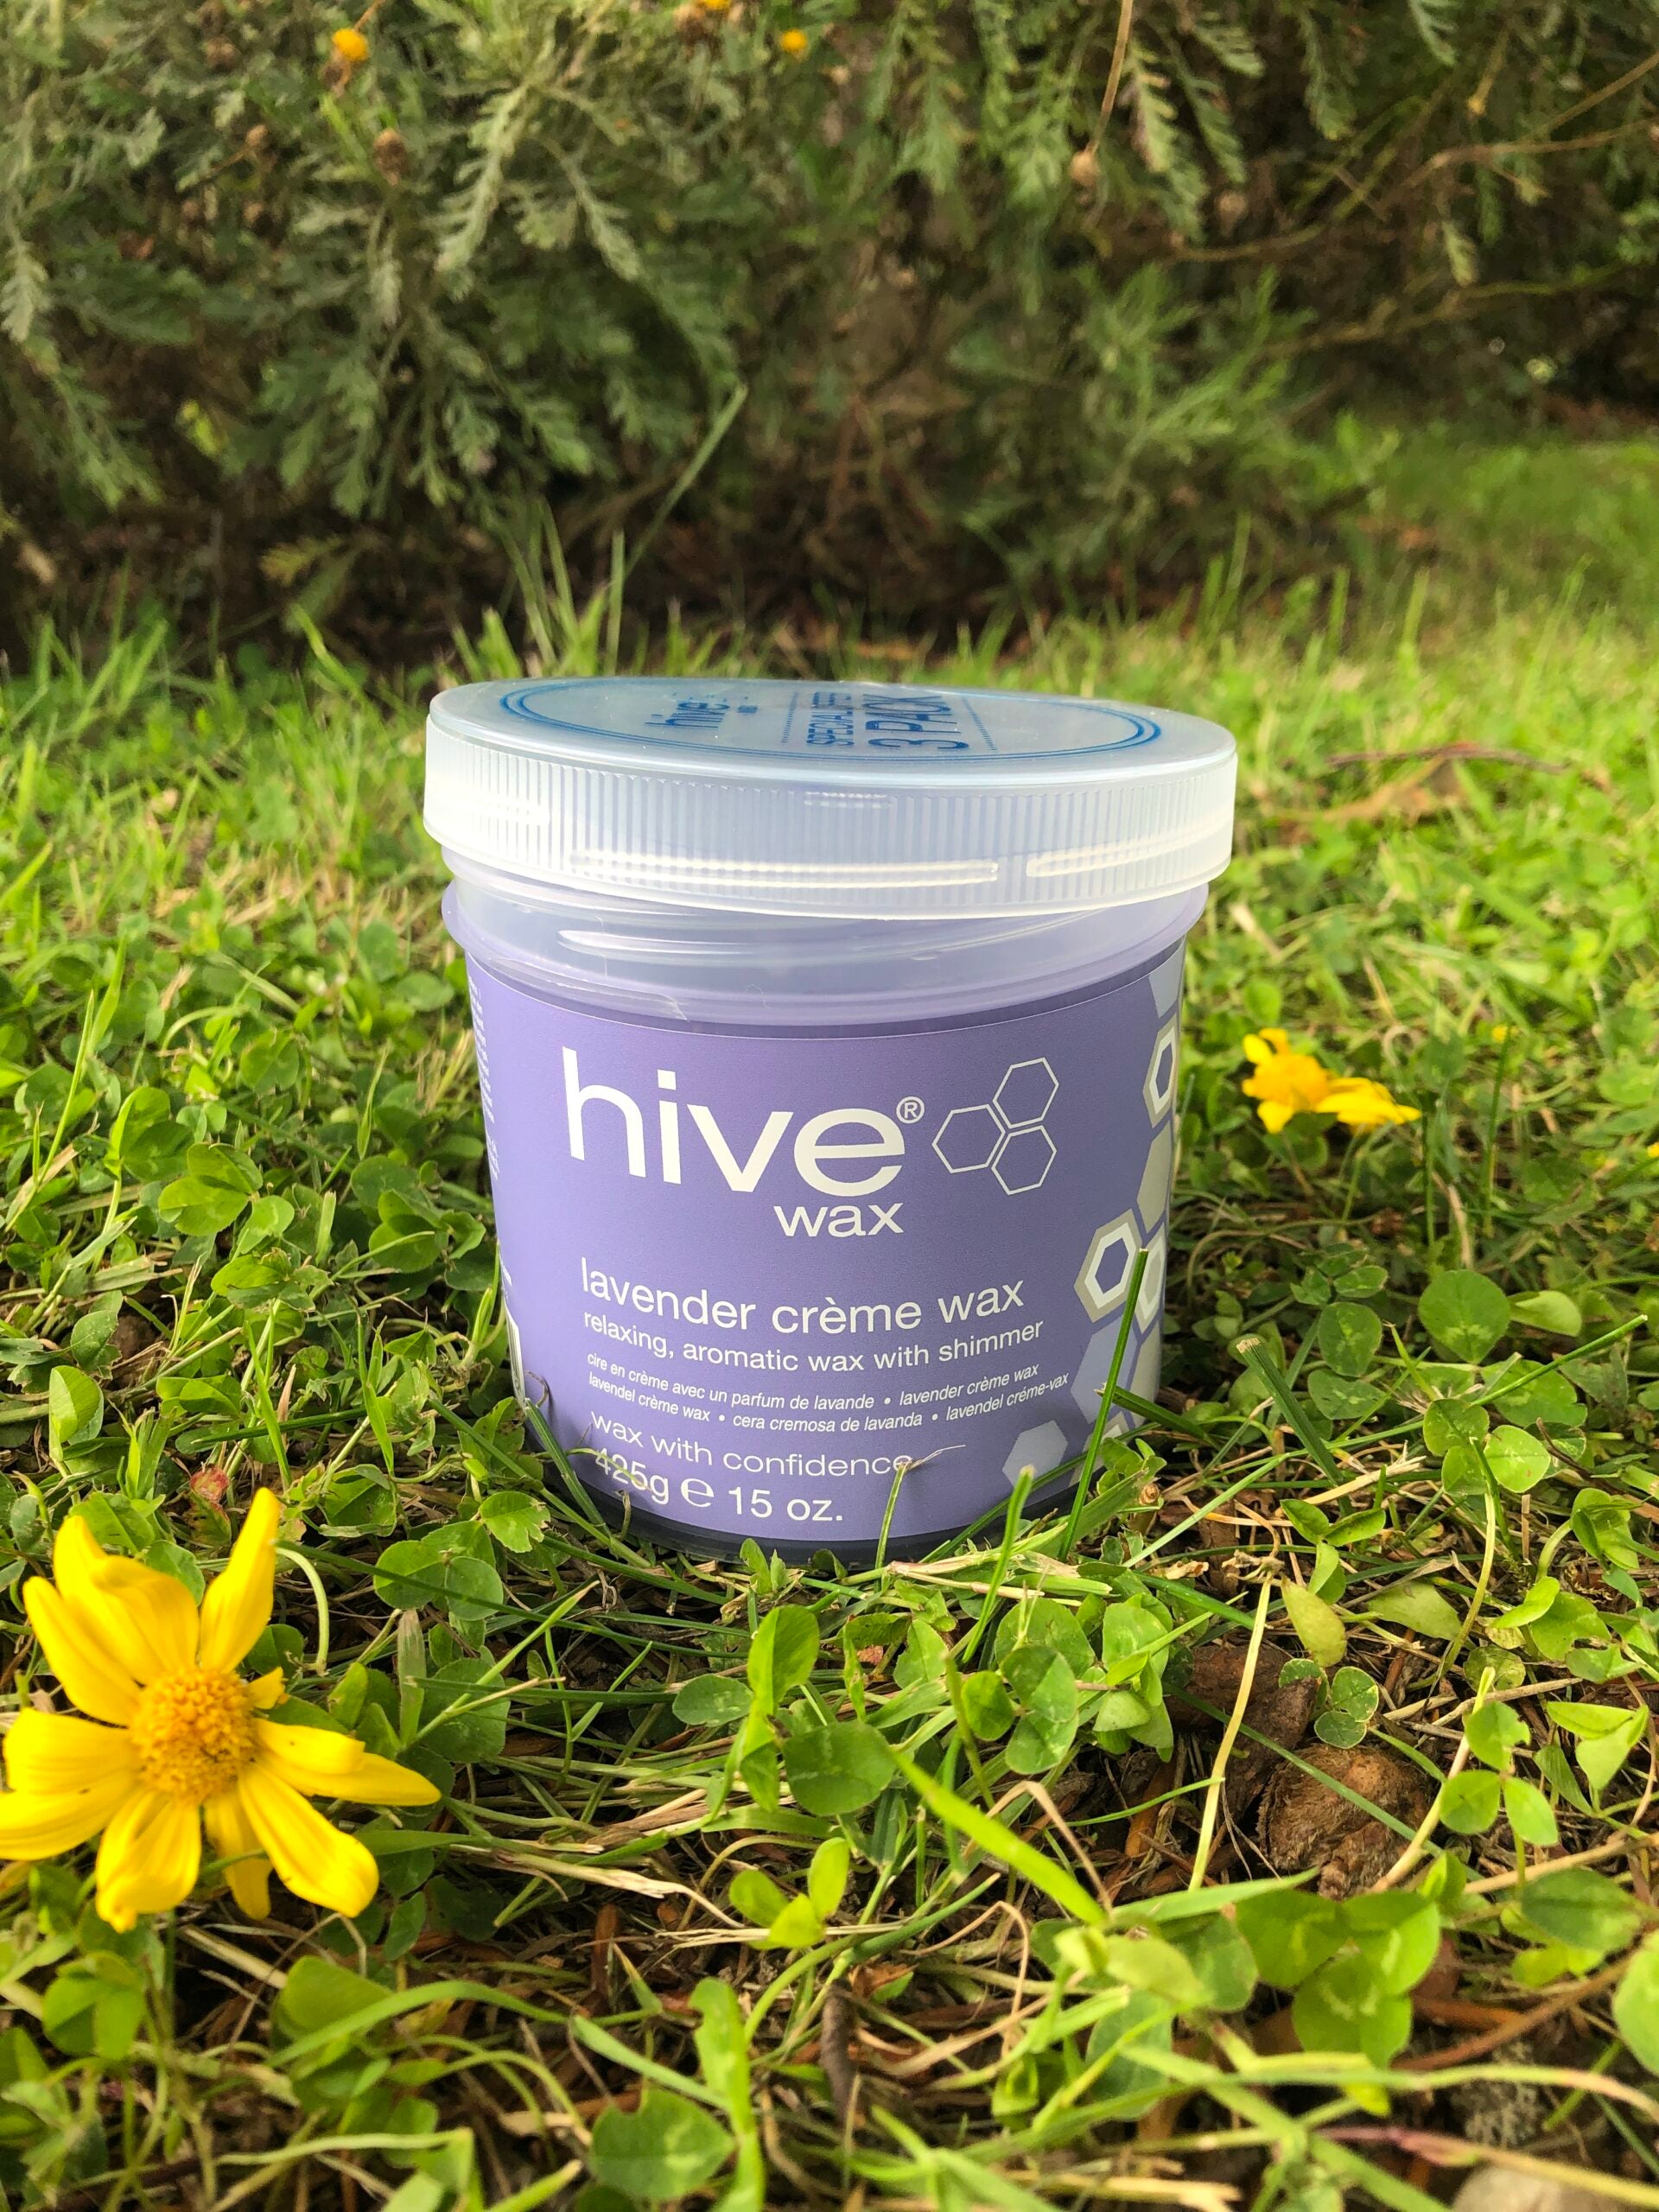 Hive Lavender Creme (with shimmer) Wax 425g